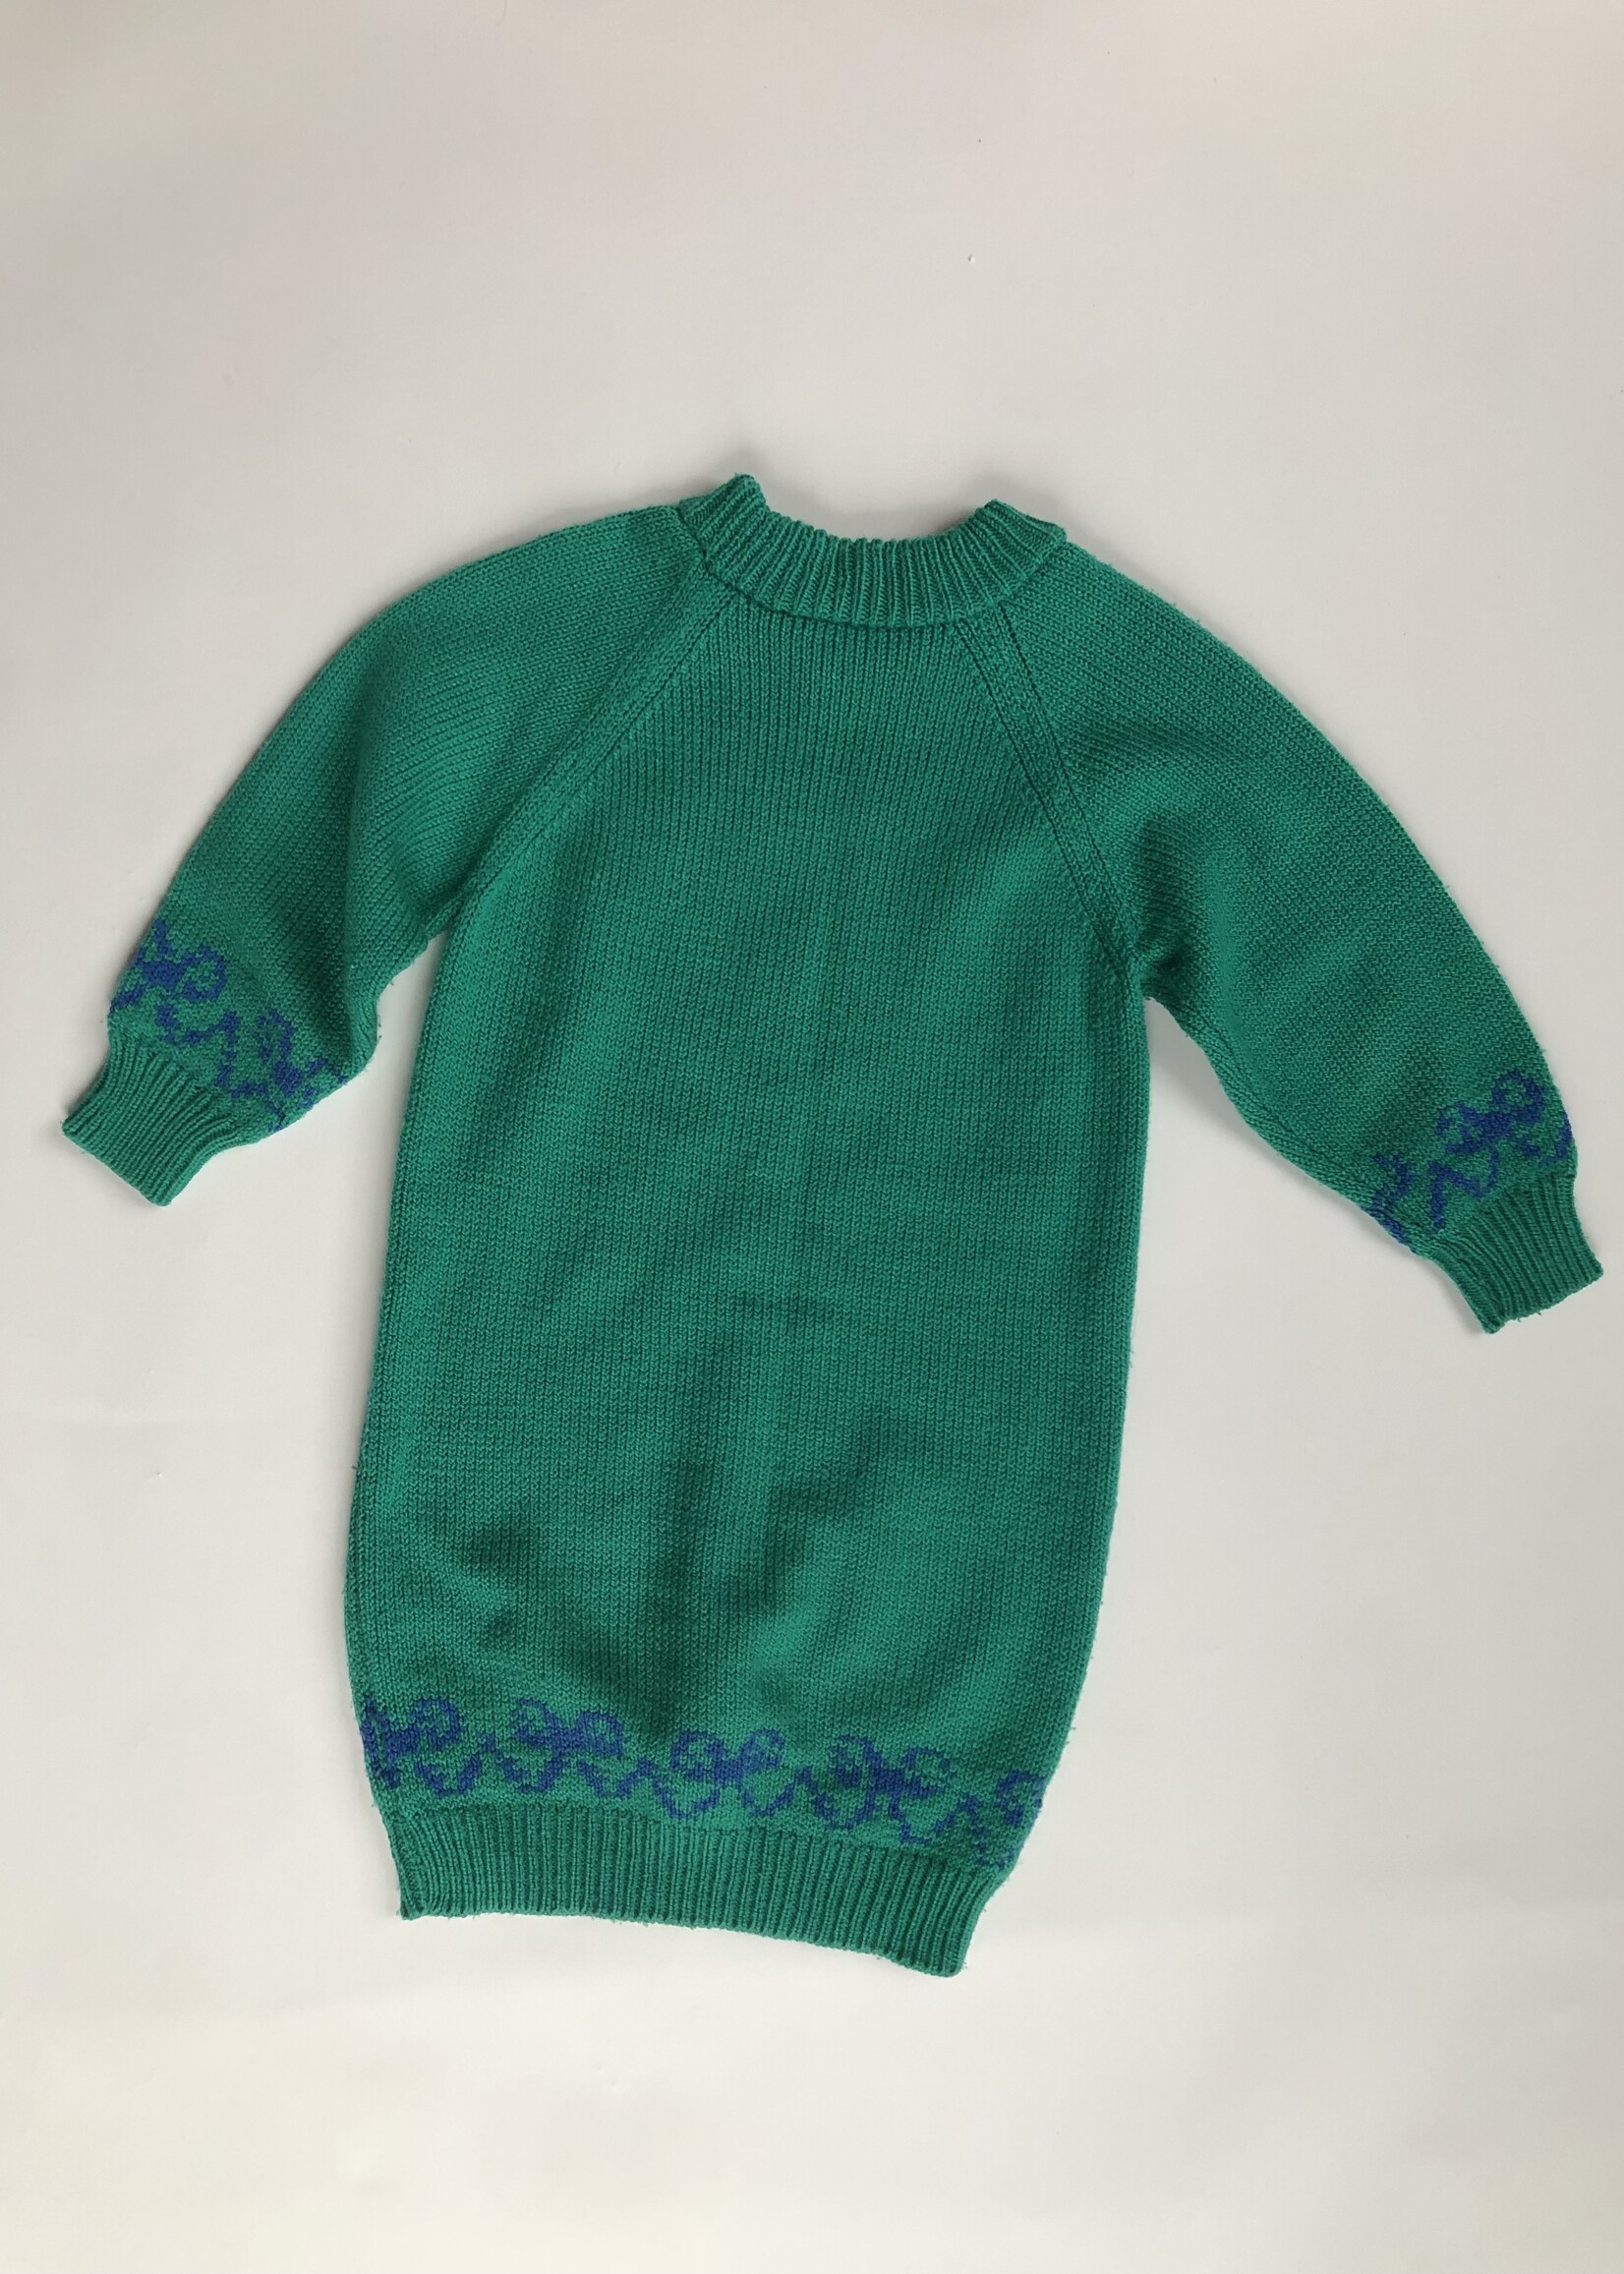 Knitted Barbie sweater dress 5-6y